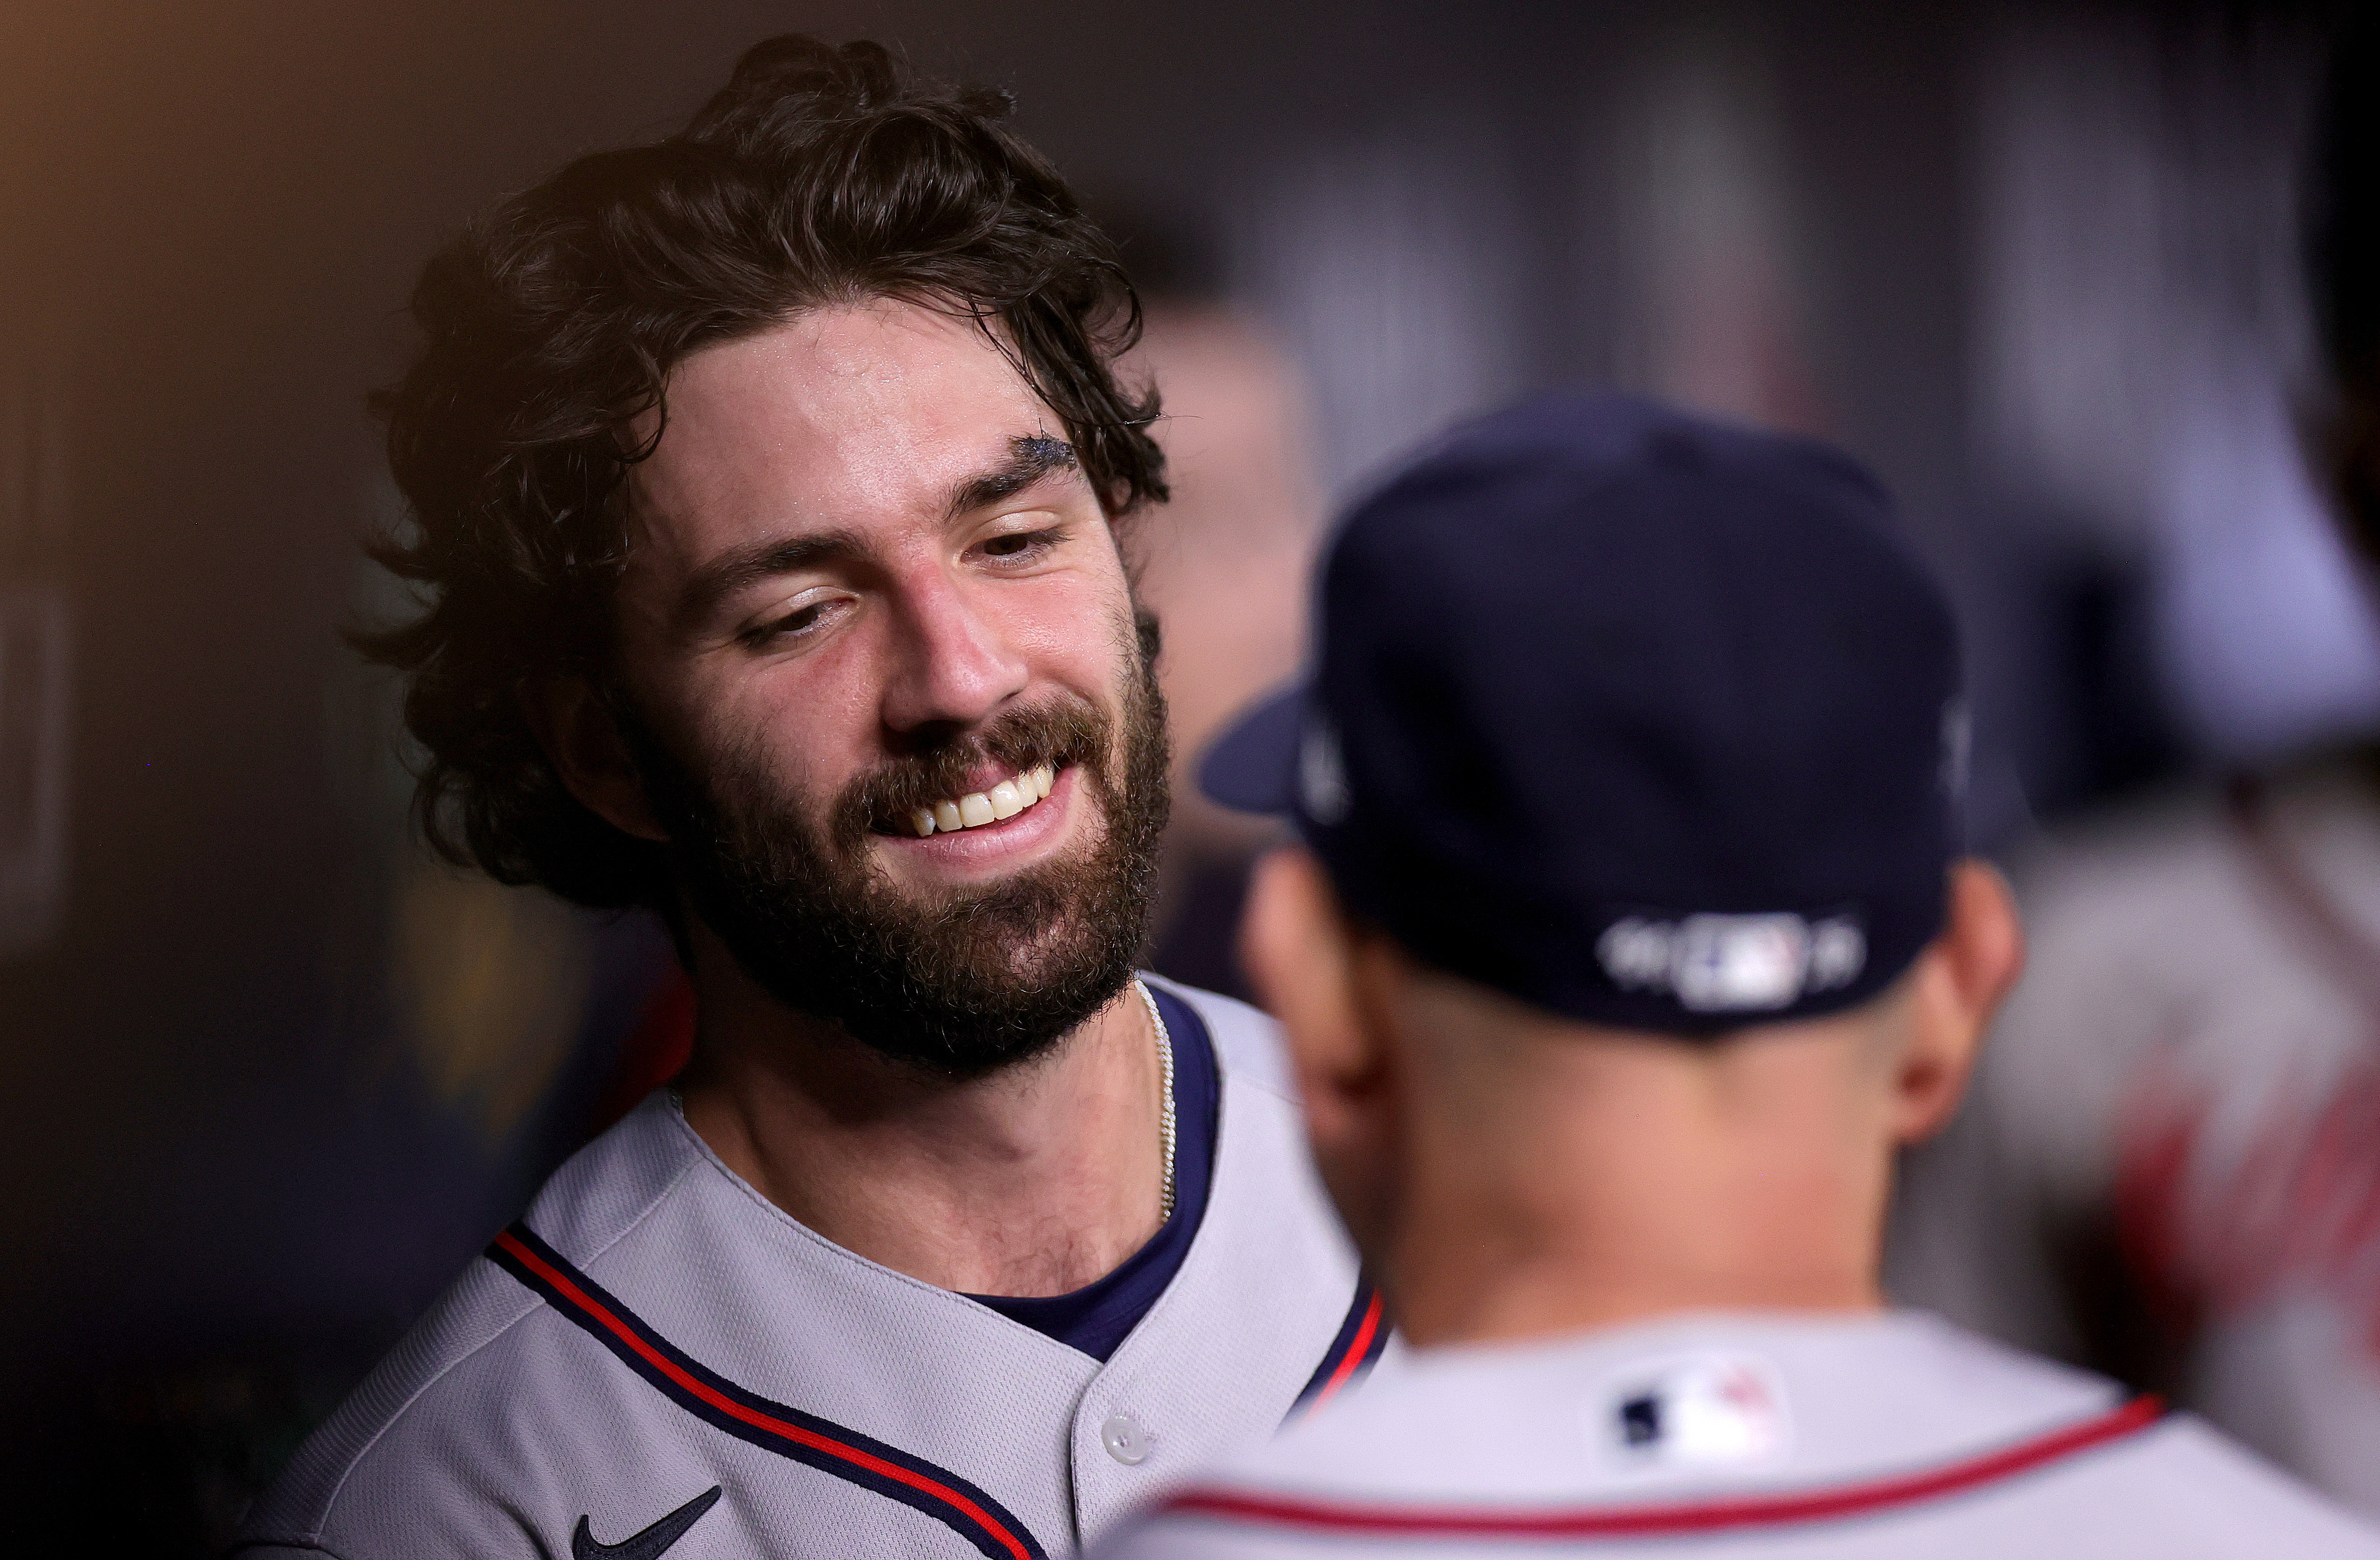 Dansby Swanson on X: Thank you @express for coming to ATL to hang